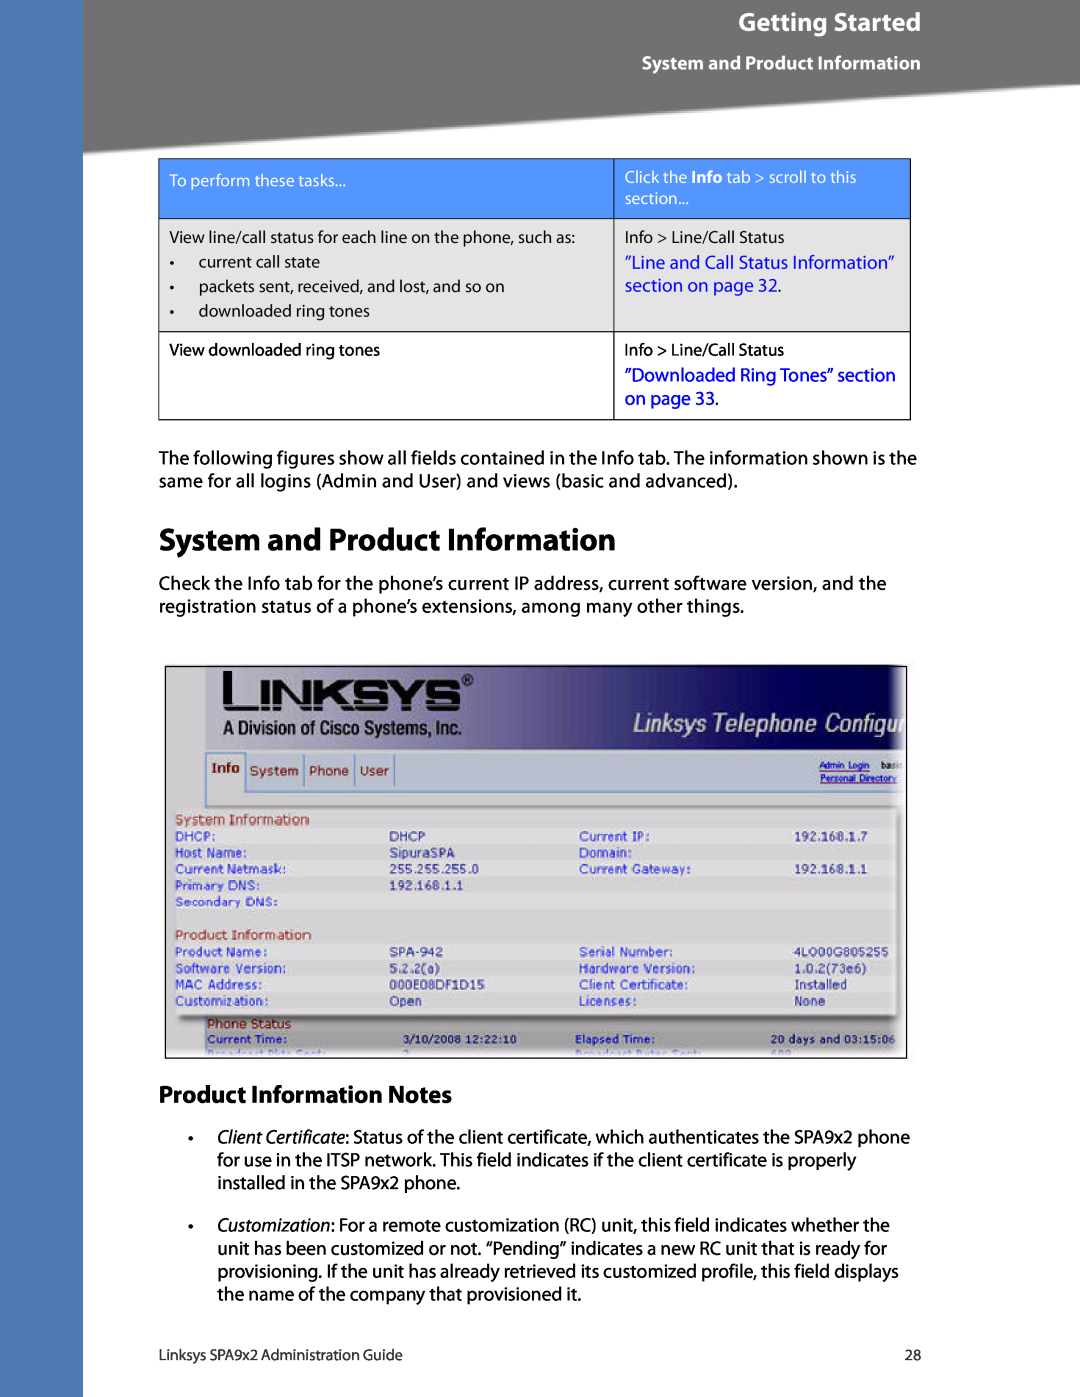 Linksys SPA922 System and Product Information, Product Information Notes, ”Line and Call Status Information”, on page 